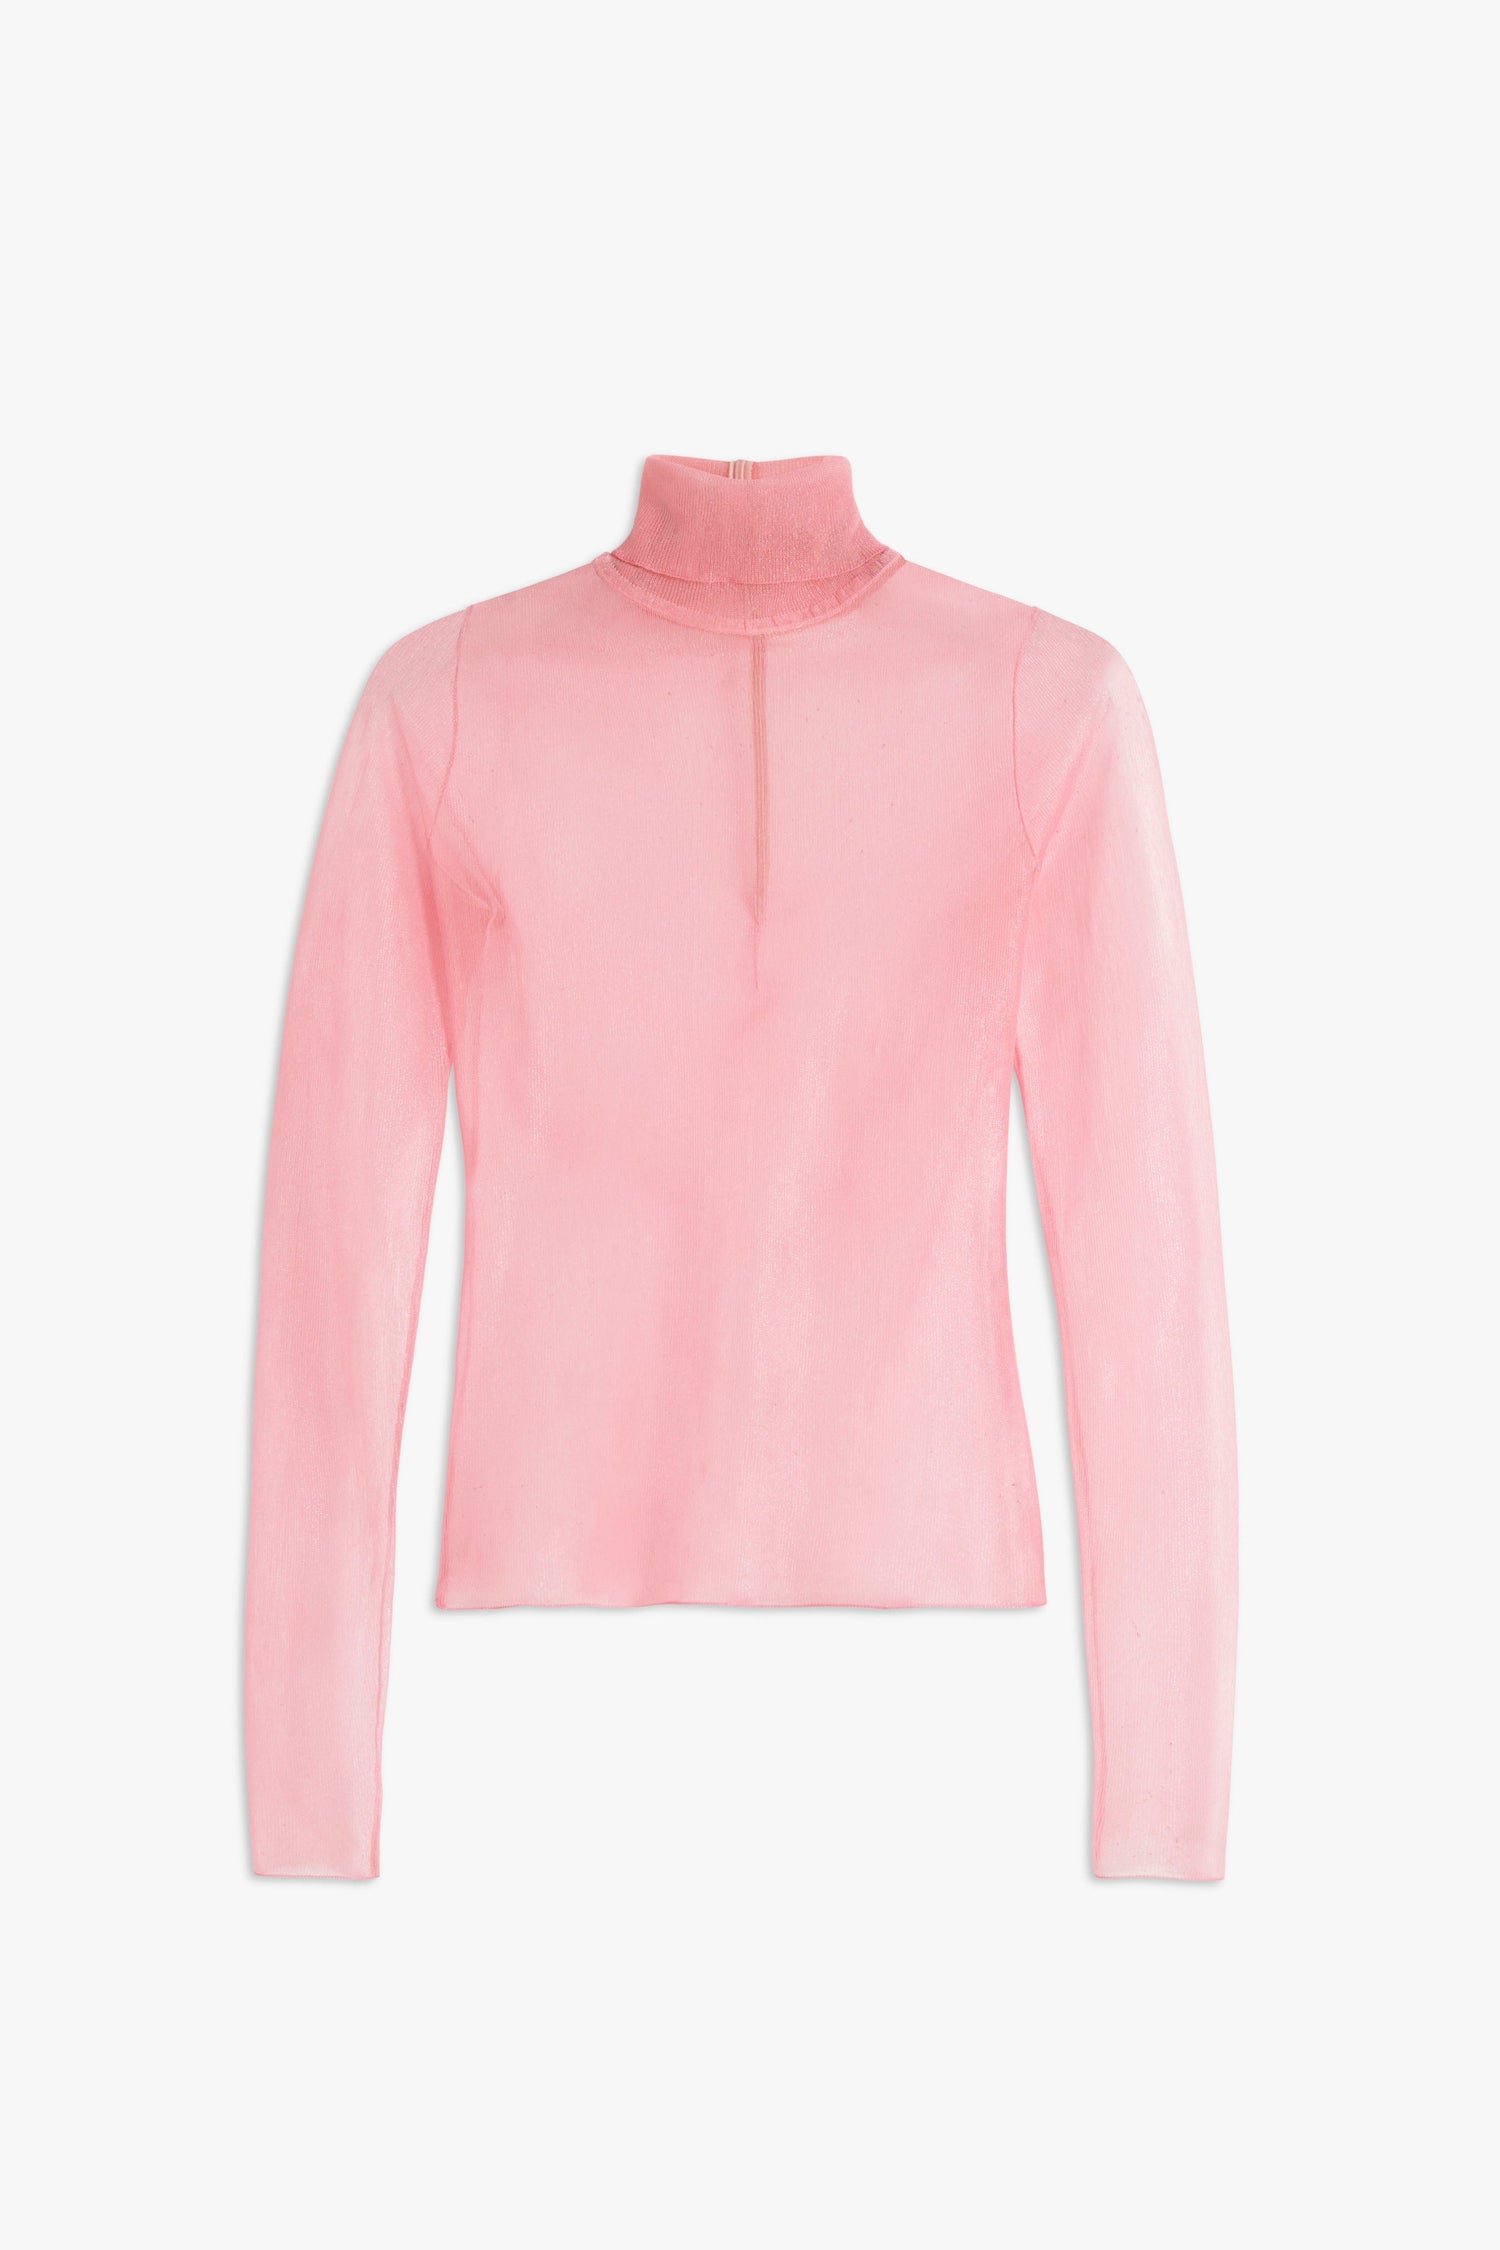 Product image of the sheer pink polo neck top from Victoria Beckham. This sheer lightweight top, perfect for layering has a slight glitter finish, perfect for partywear.